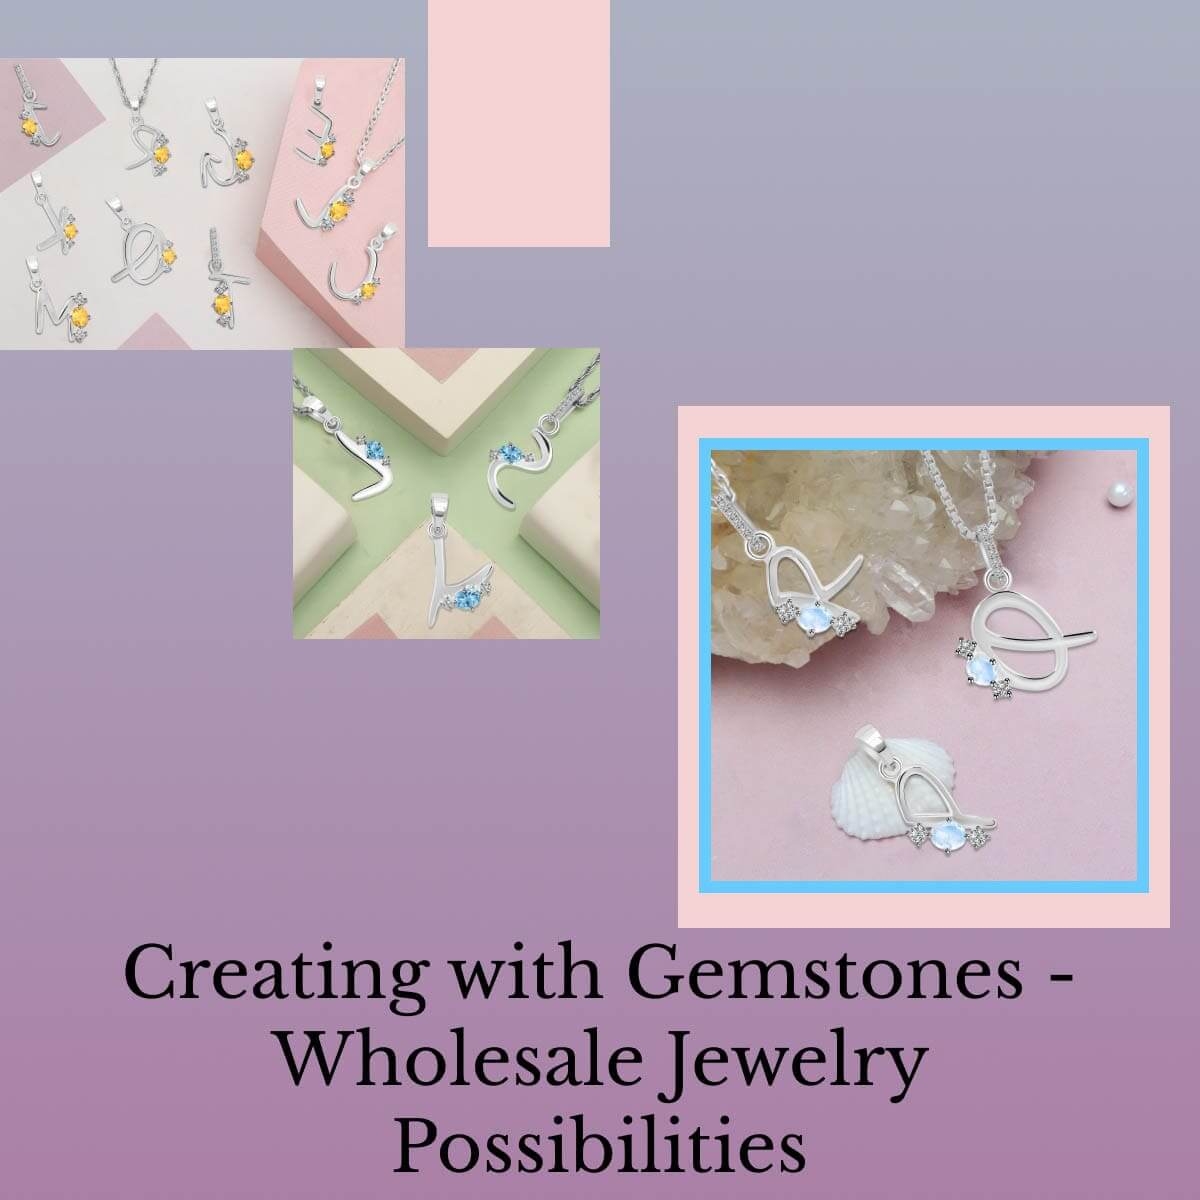 Wholesale Gemstone Jewelry Manufacturers and Suppliers: A Backbone of Possibilities